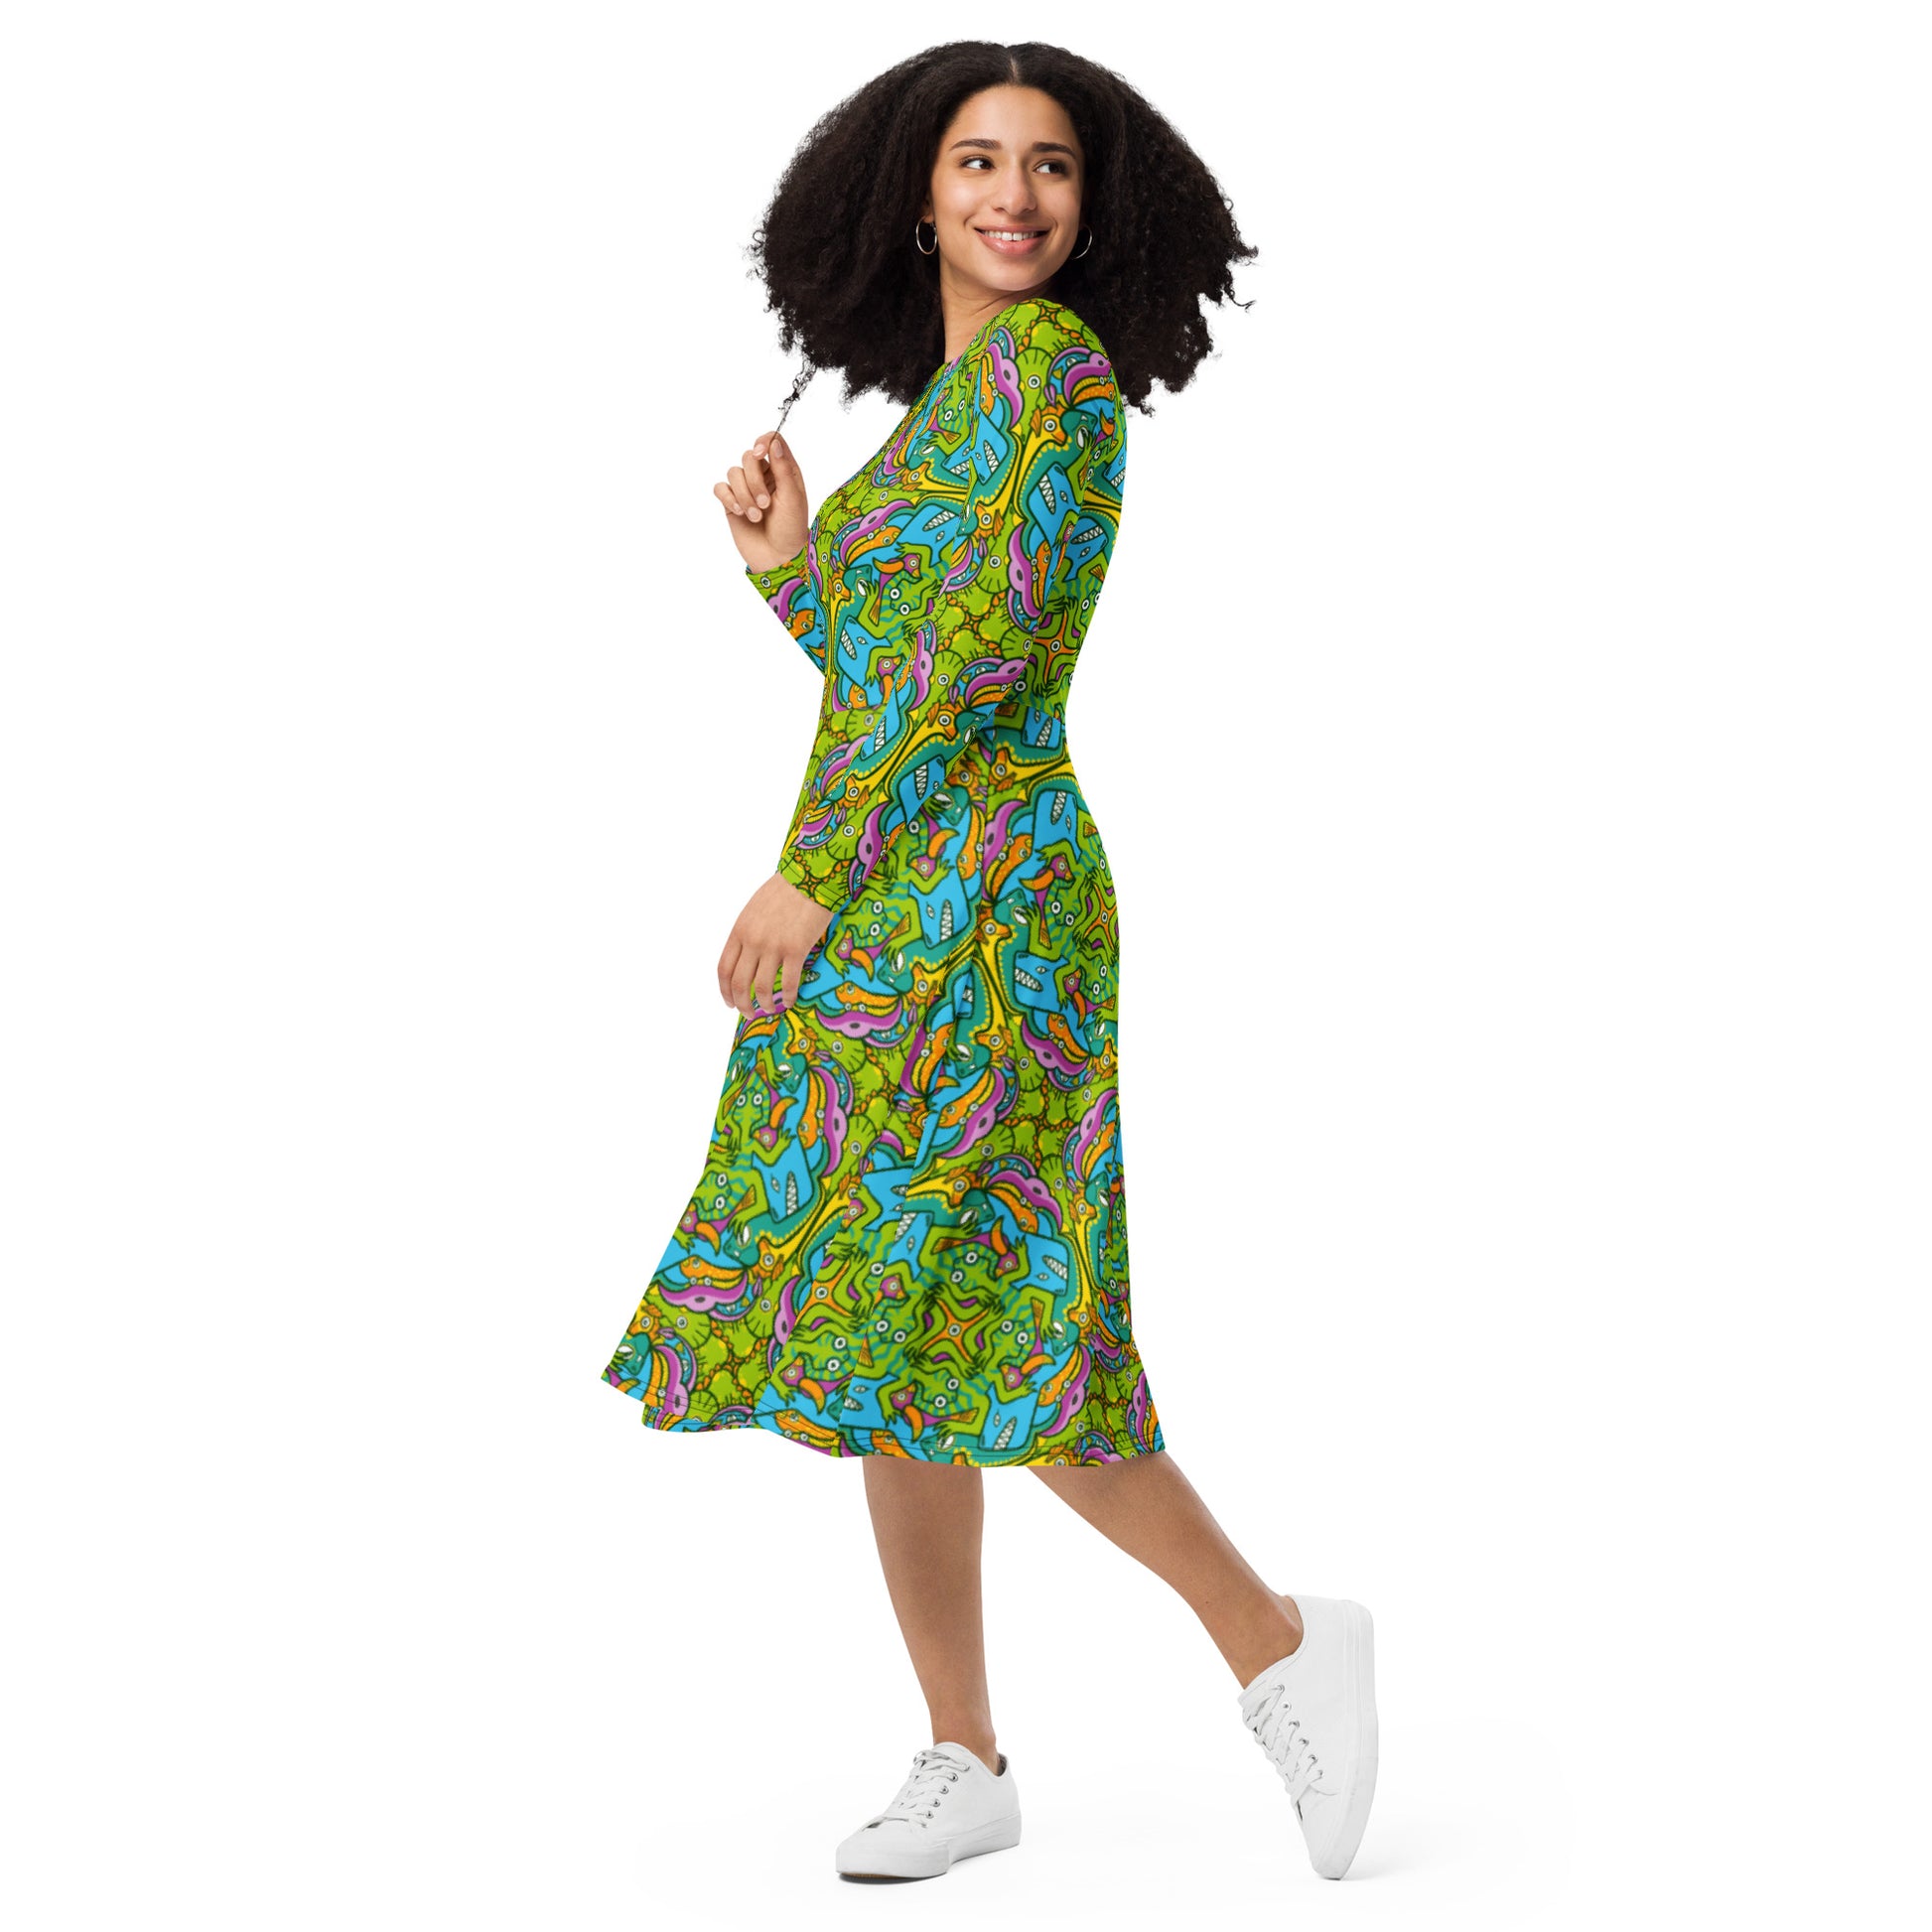 To keep calm and doodle is more than just doodling All-over print long sleeve midi dress. Side view